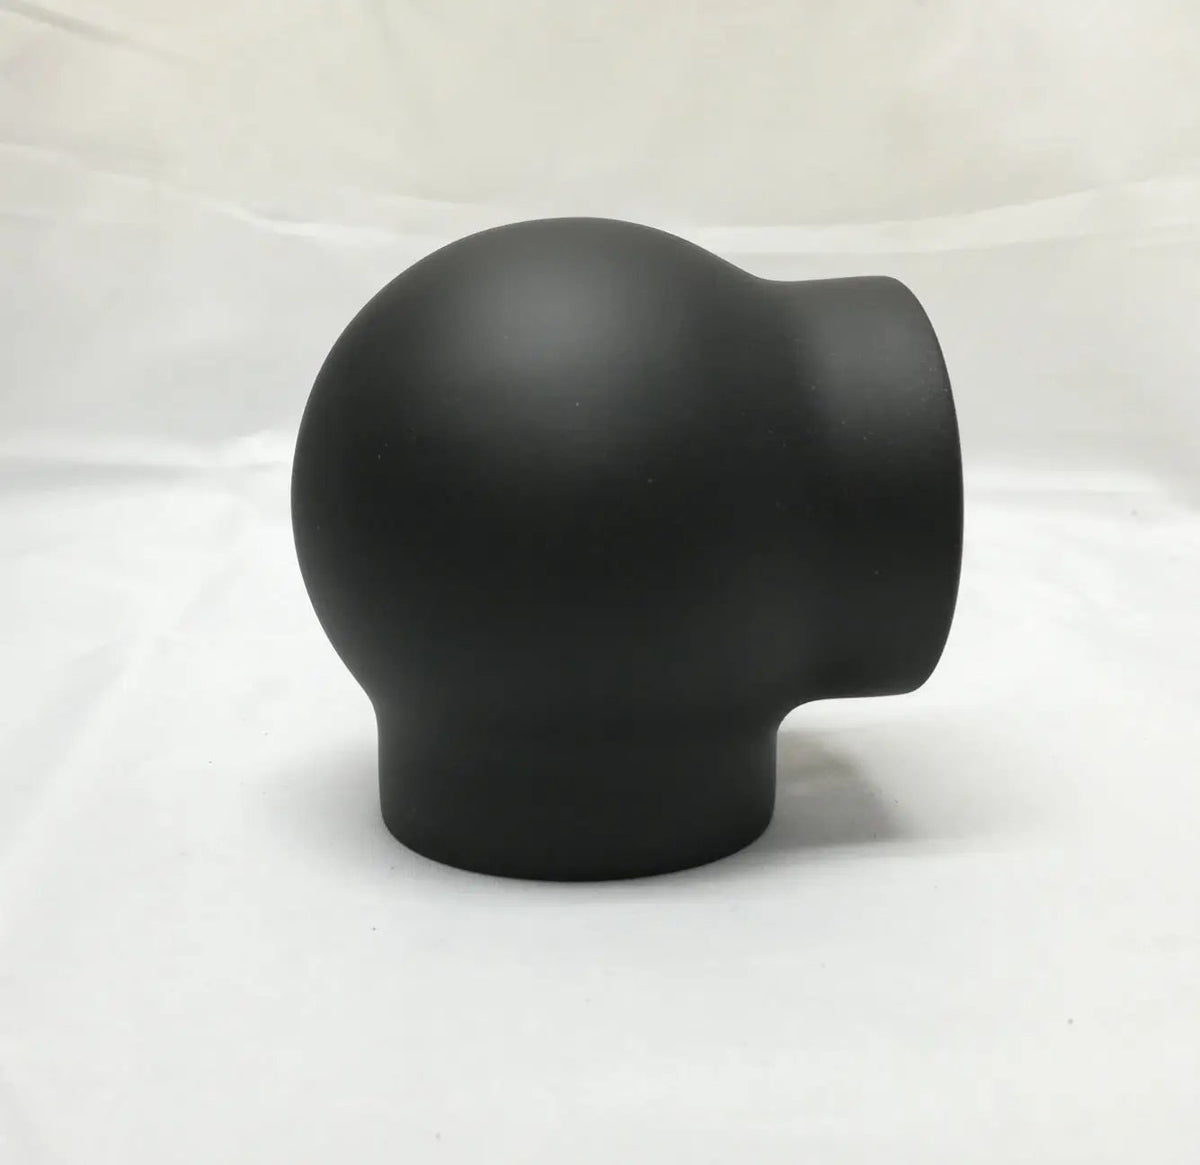 Ball Elbow for 1" Tubing - Trade Diversified